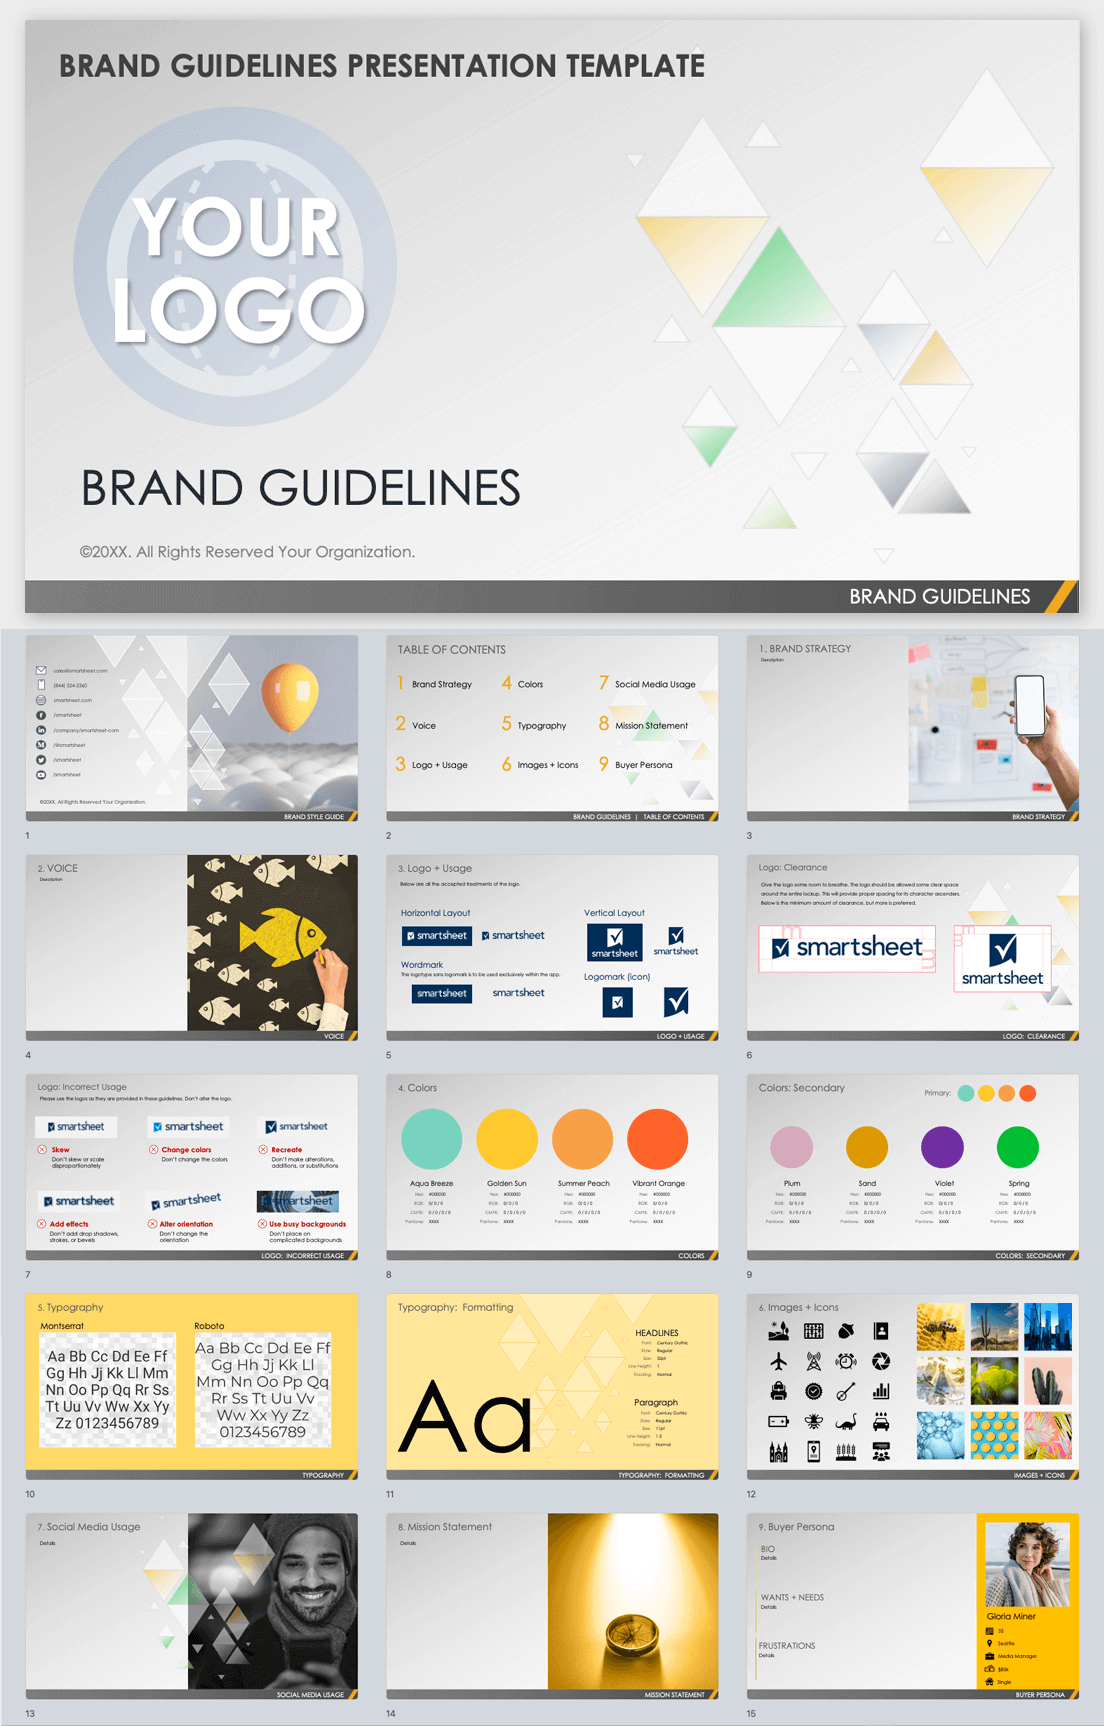 Brand Guidelines Template for Designers, Branding and Logo Presentation